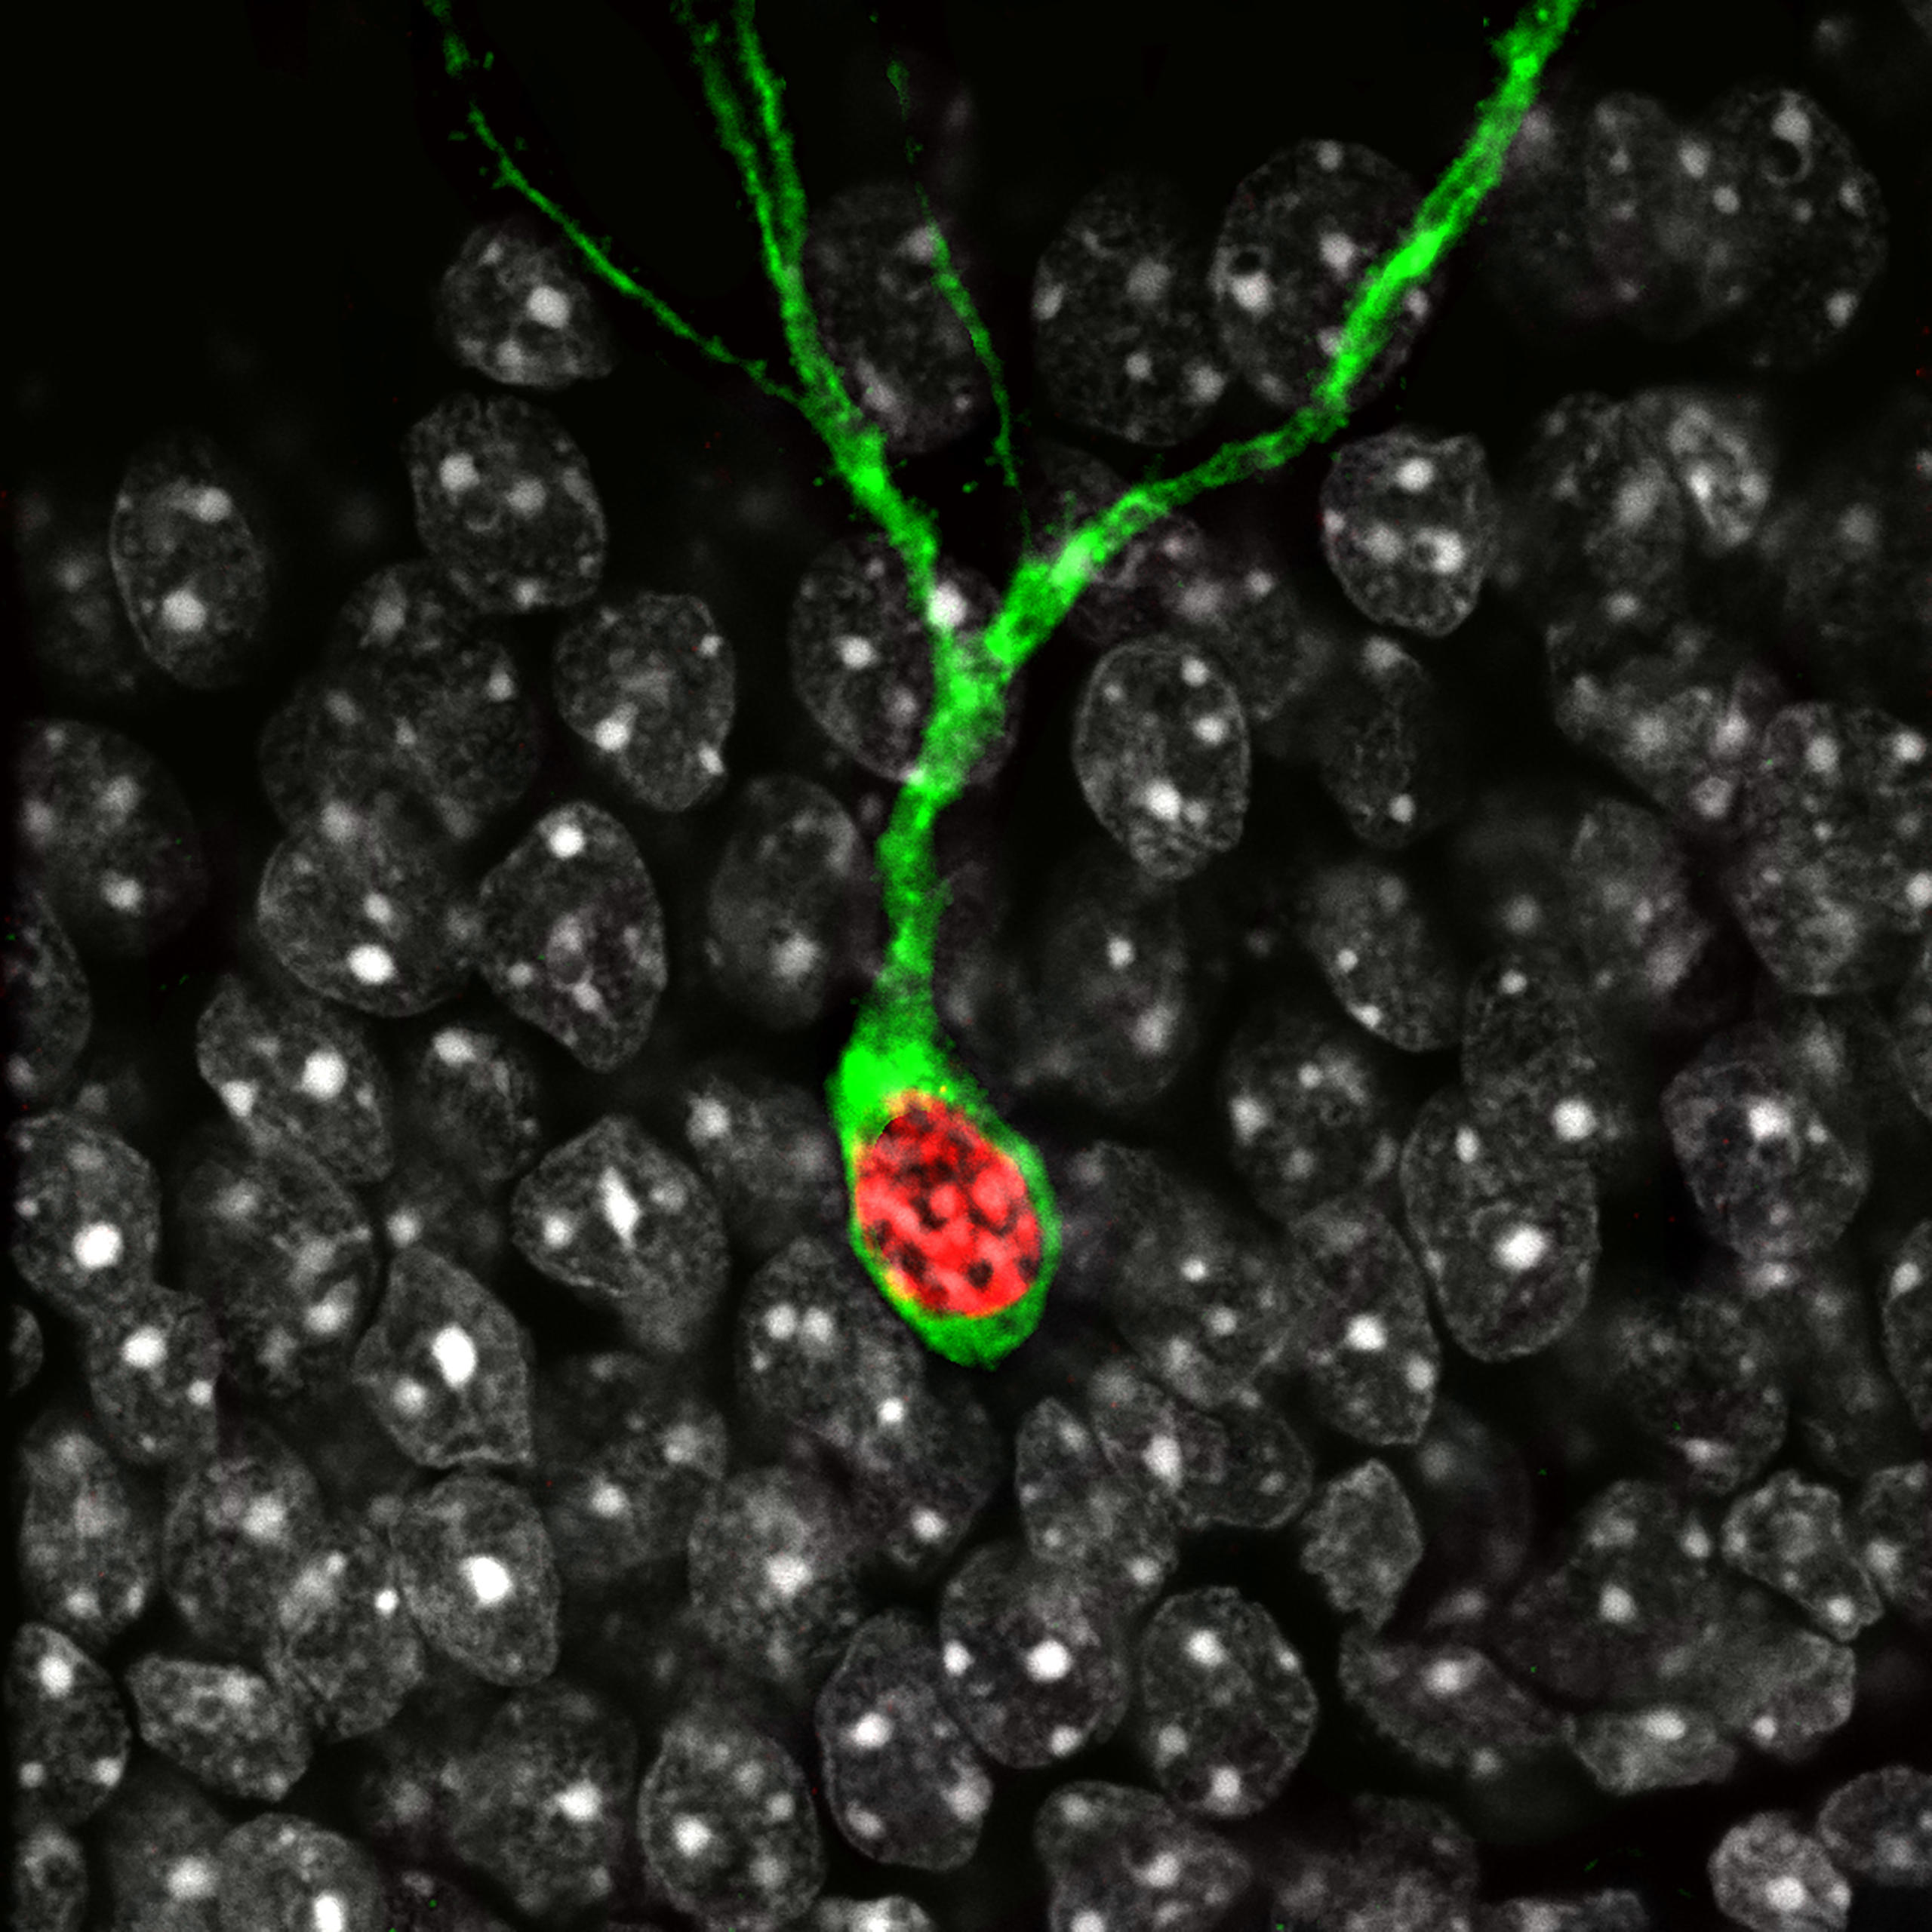 Cell pathway in red and green